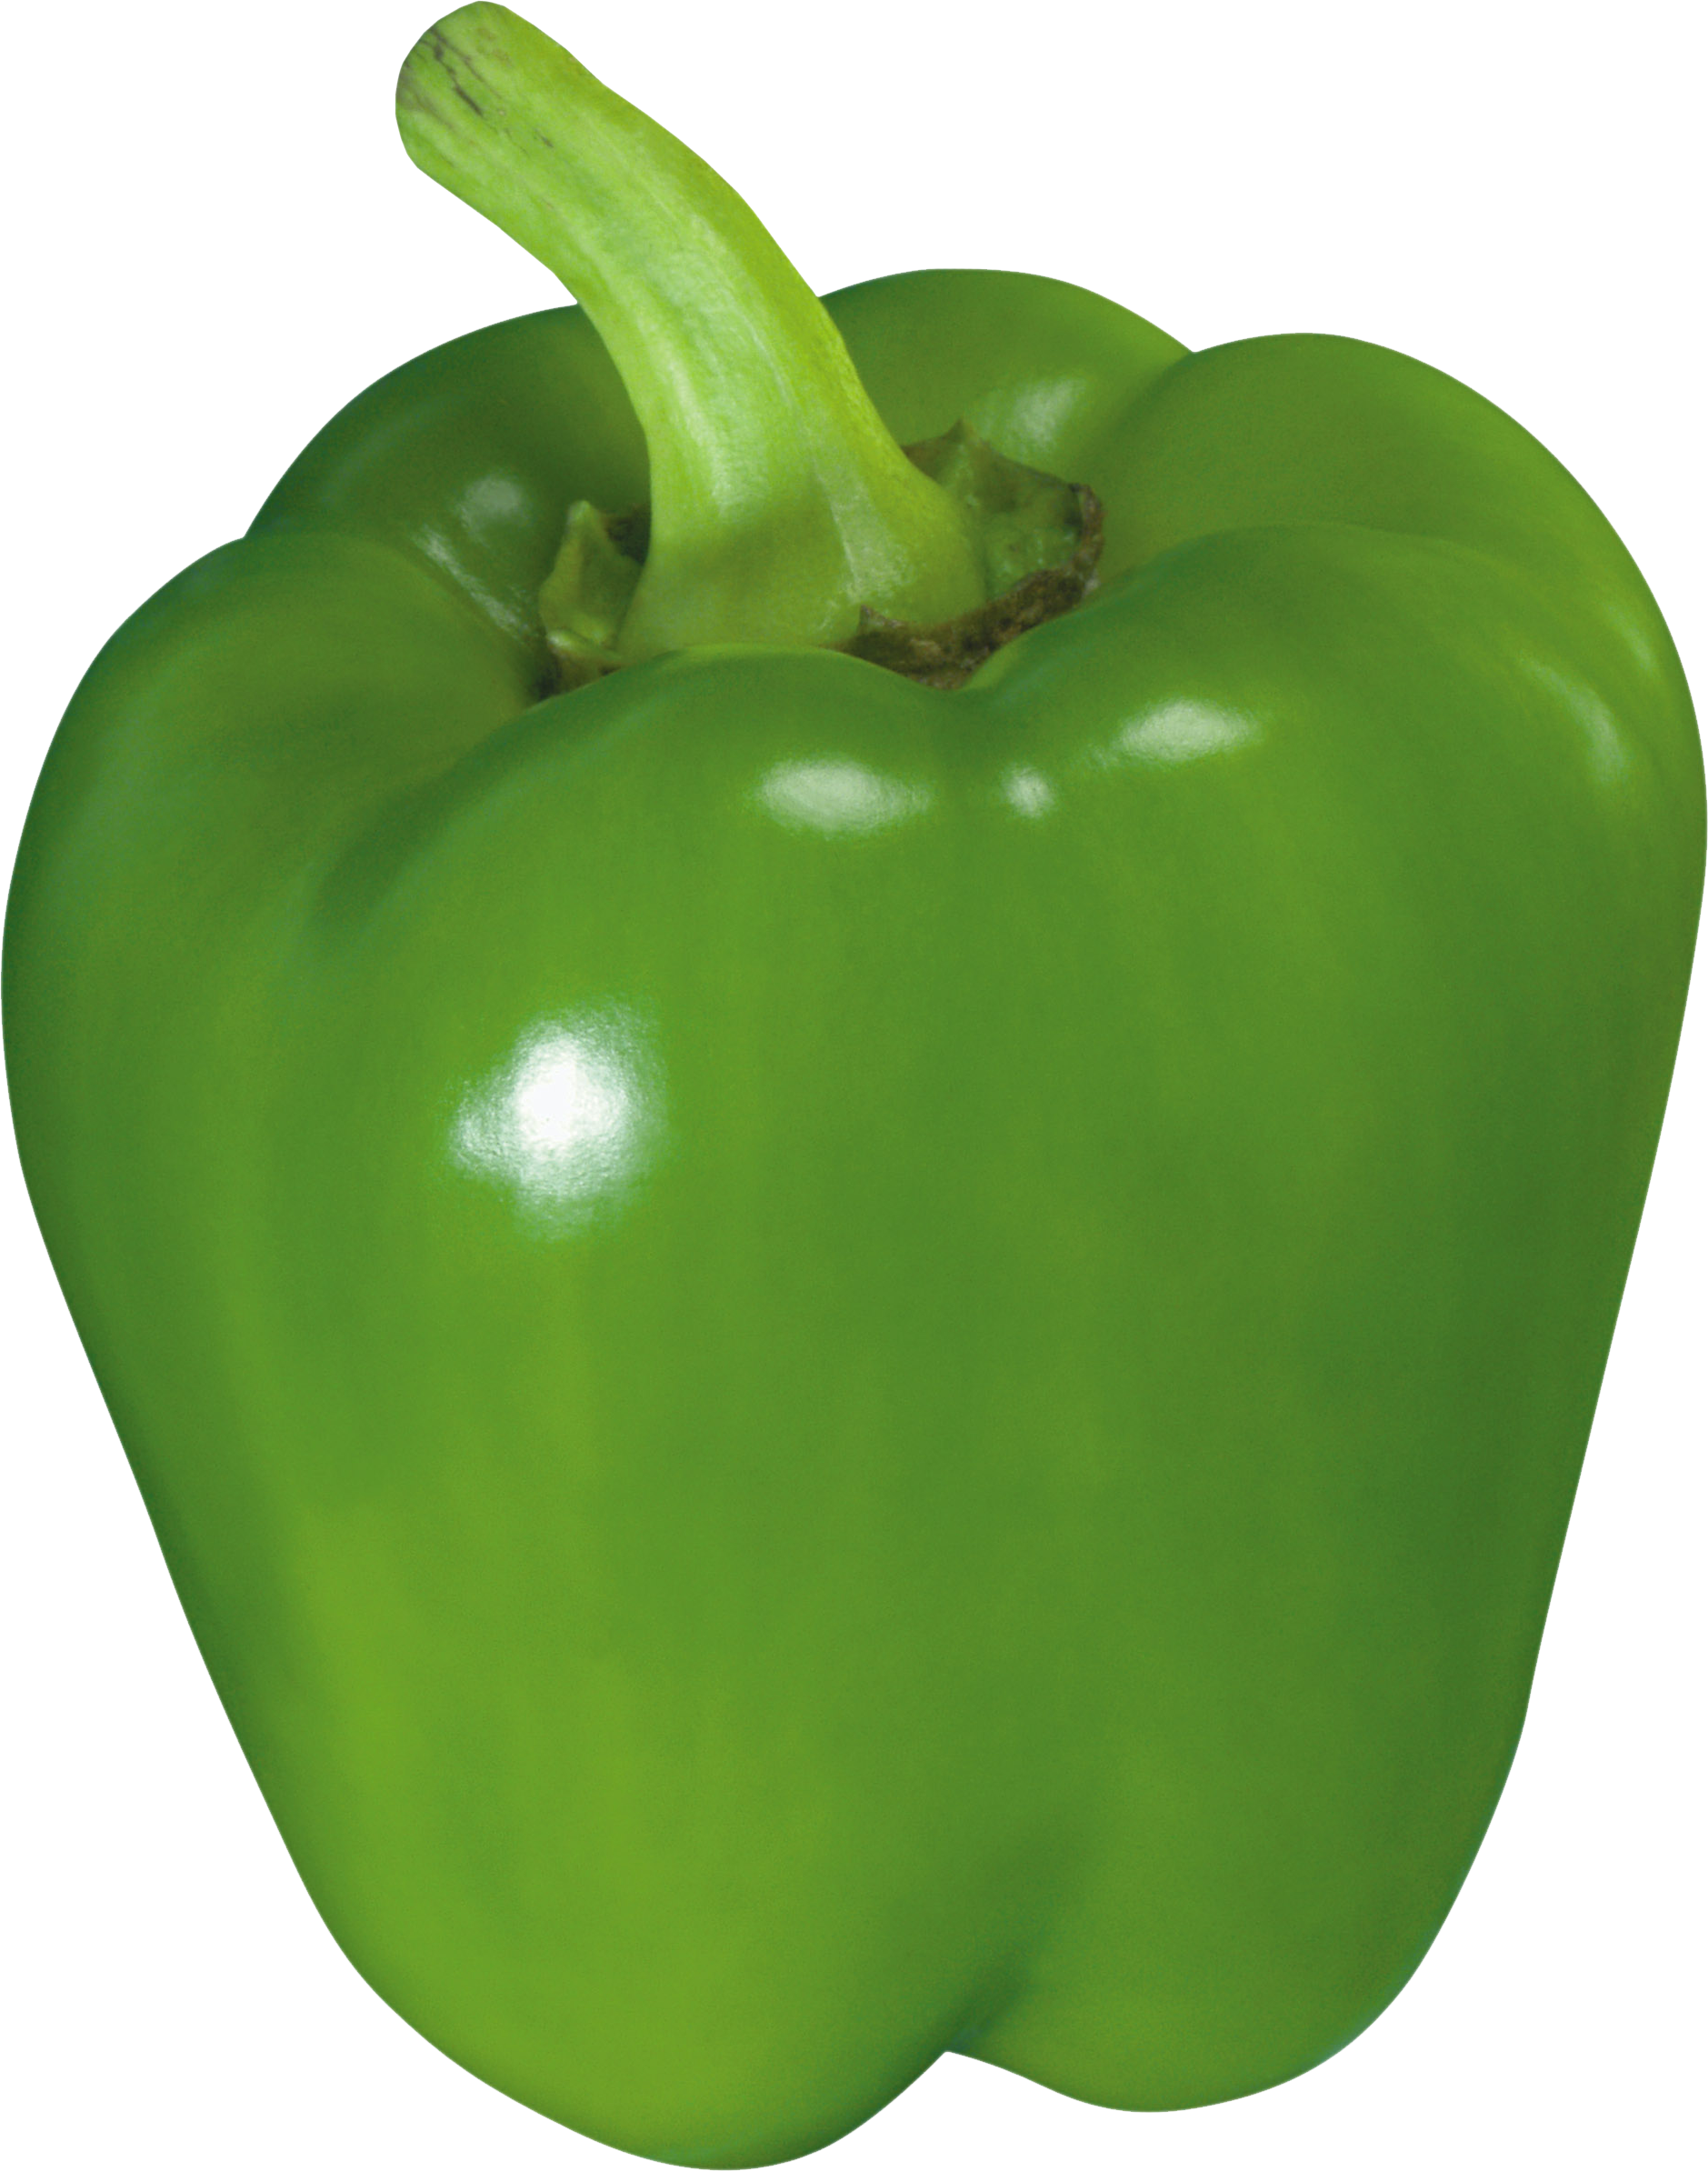 Image Result For Pepper Png Image Free Download Pepper Png Picures Pngimg - Pepper, Transparent background PNG HD thumbnail